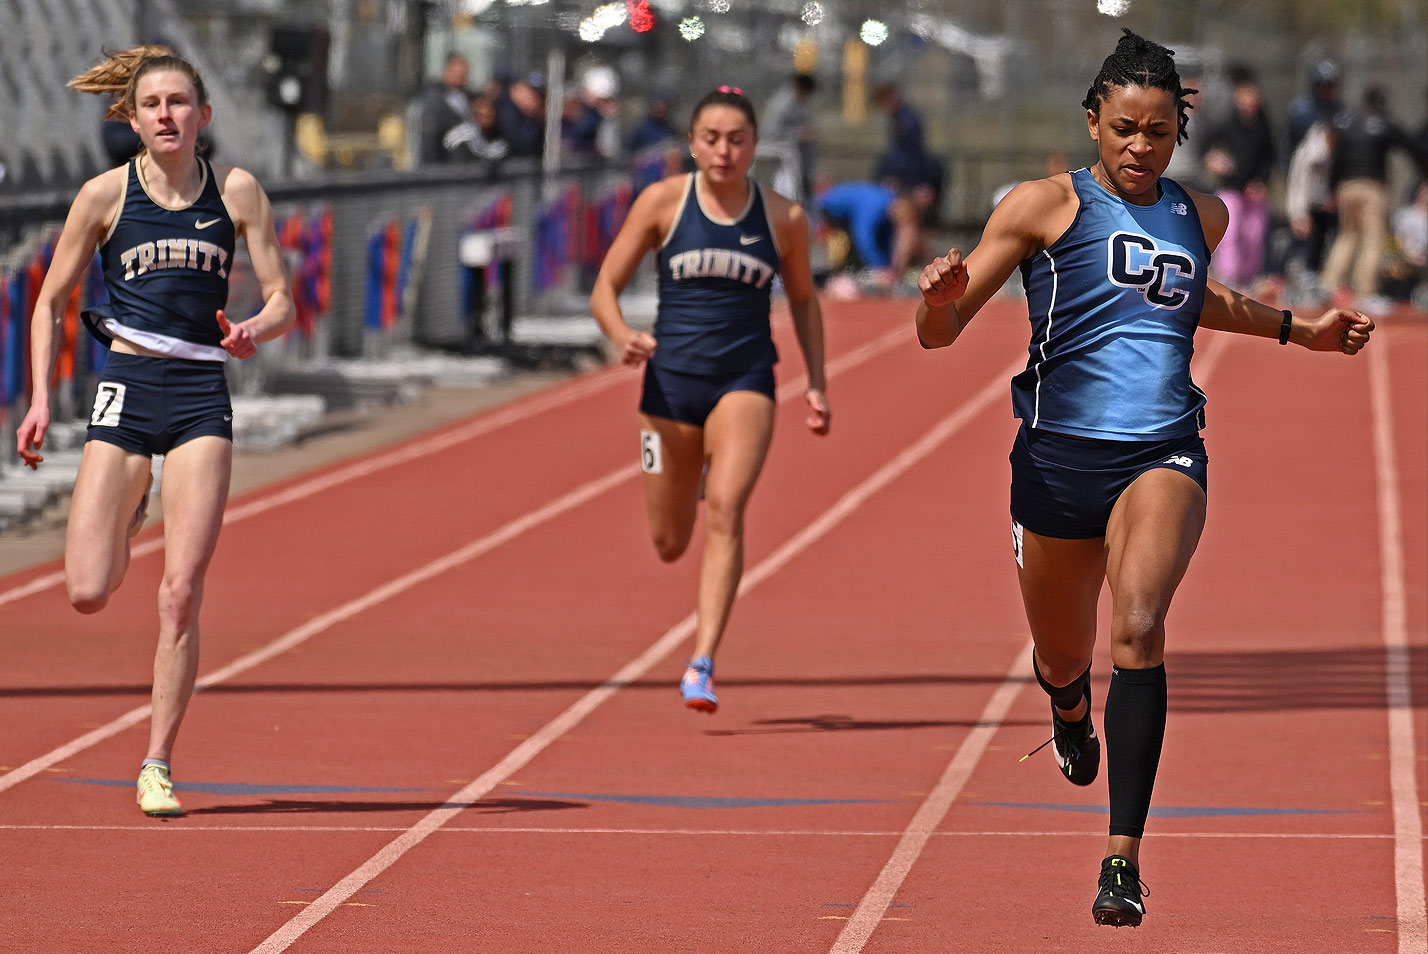 Conn College’s Malissa Lindsey ’23 competes in the 100m at the Coast Guard Invitational track meet Saturday, April 8, 2023 in New London.